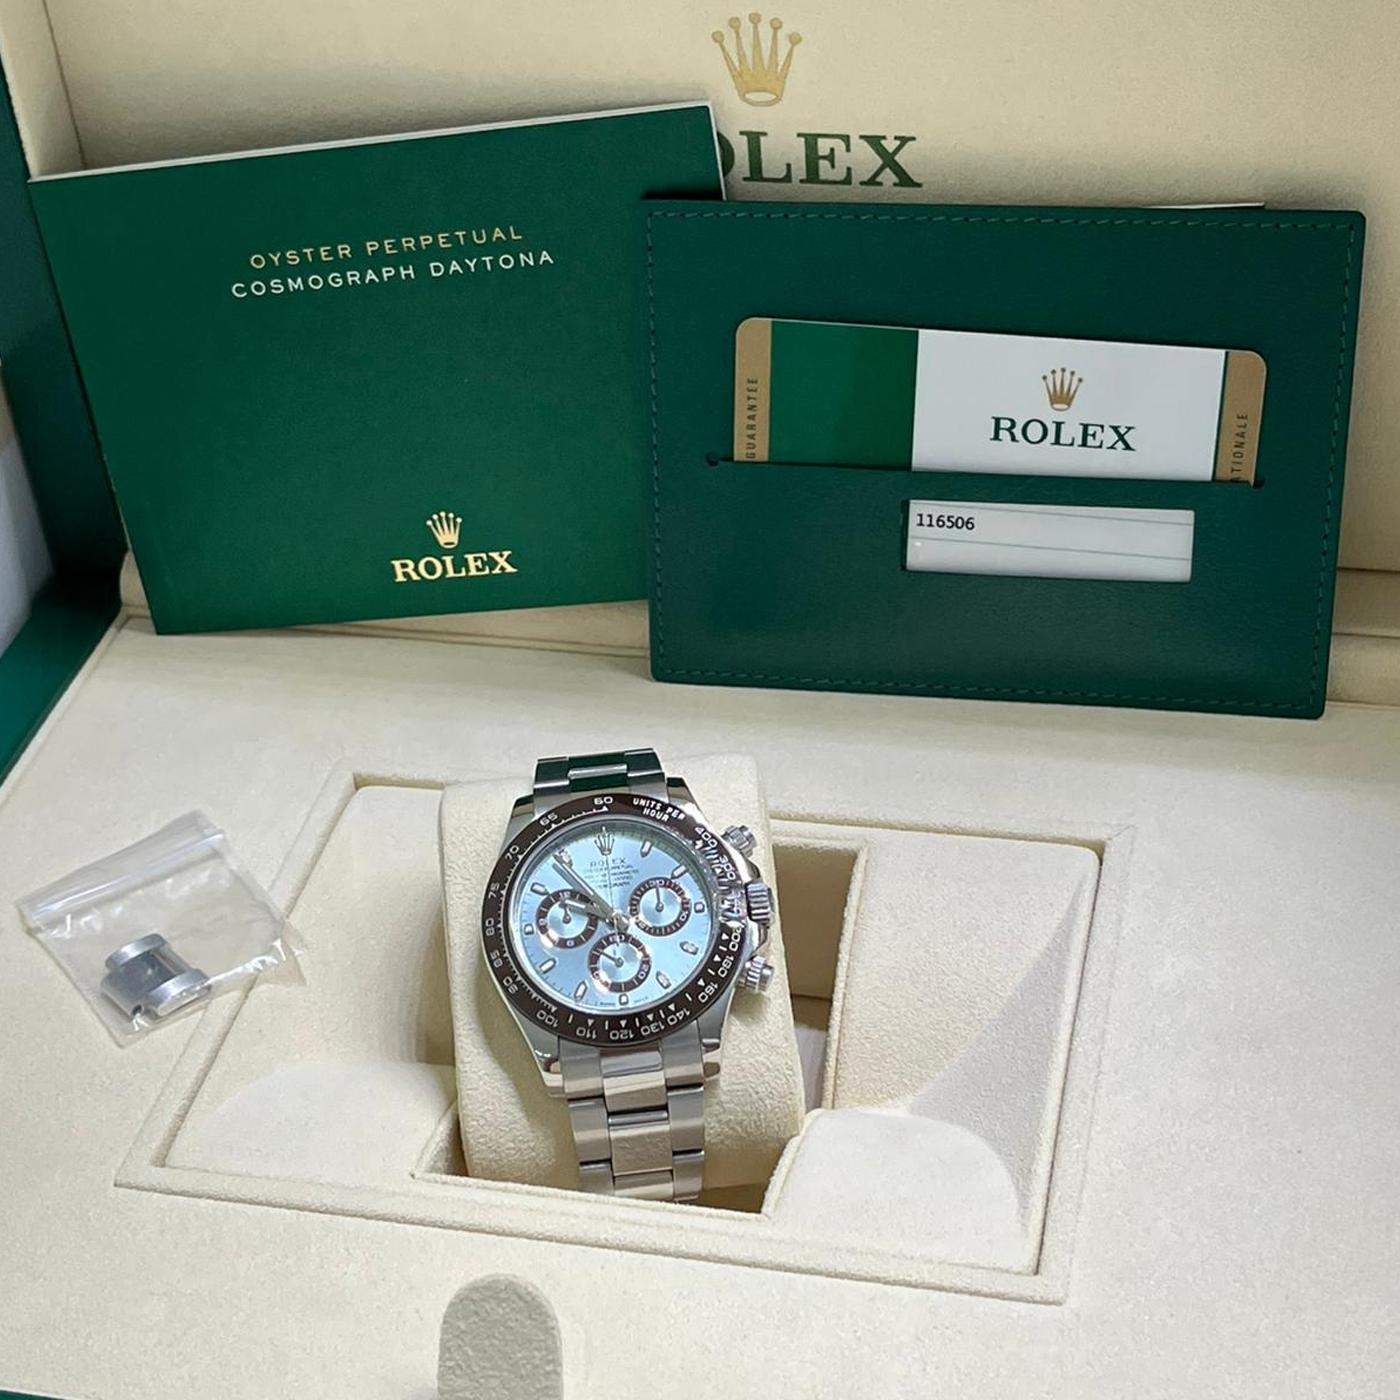 Rolex Daytona Cosmograph Oyster Perpetual Platinum Ice Blue Dial 116506 5